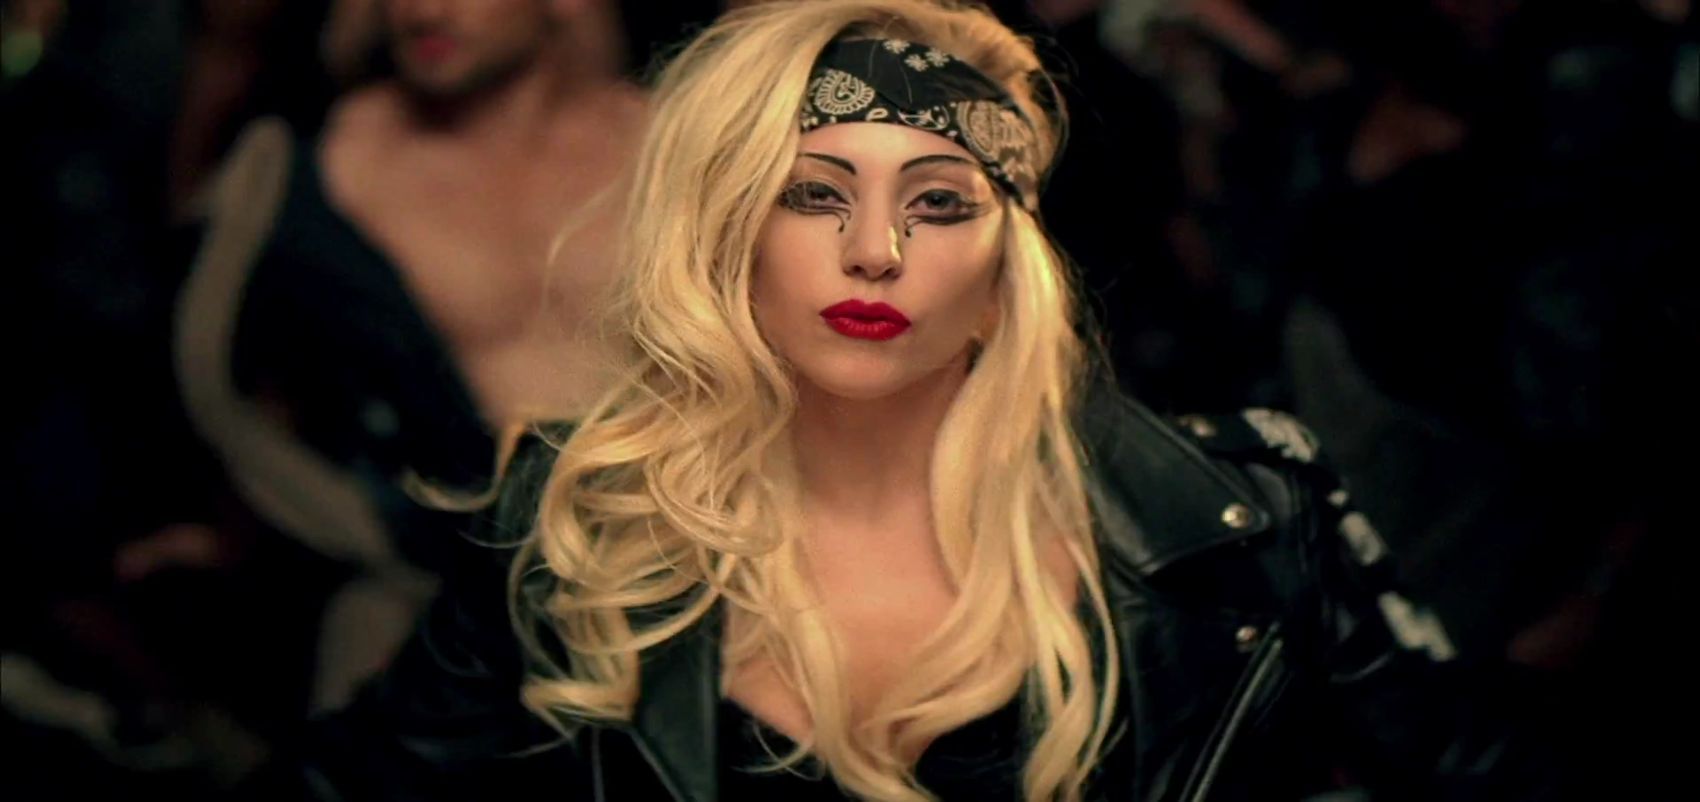 2. "Hair" by Lady Gaga (song with the word "hair" in the title) - wide 2